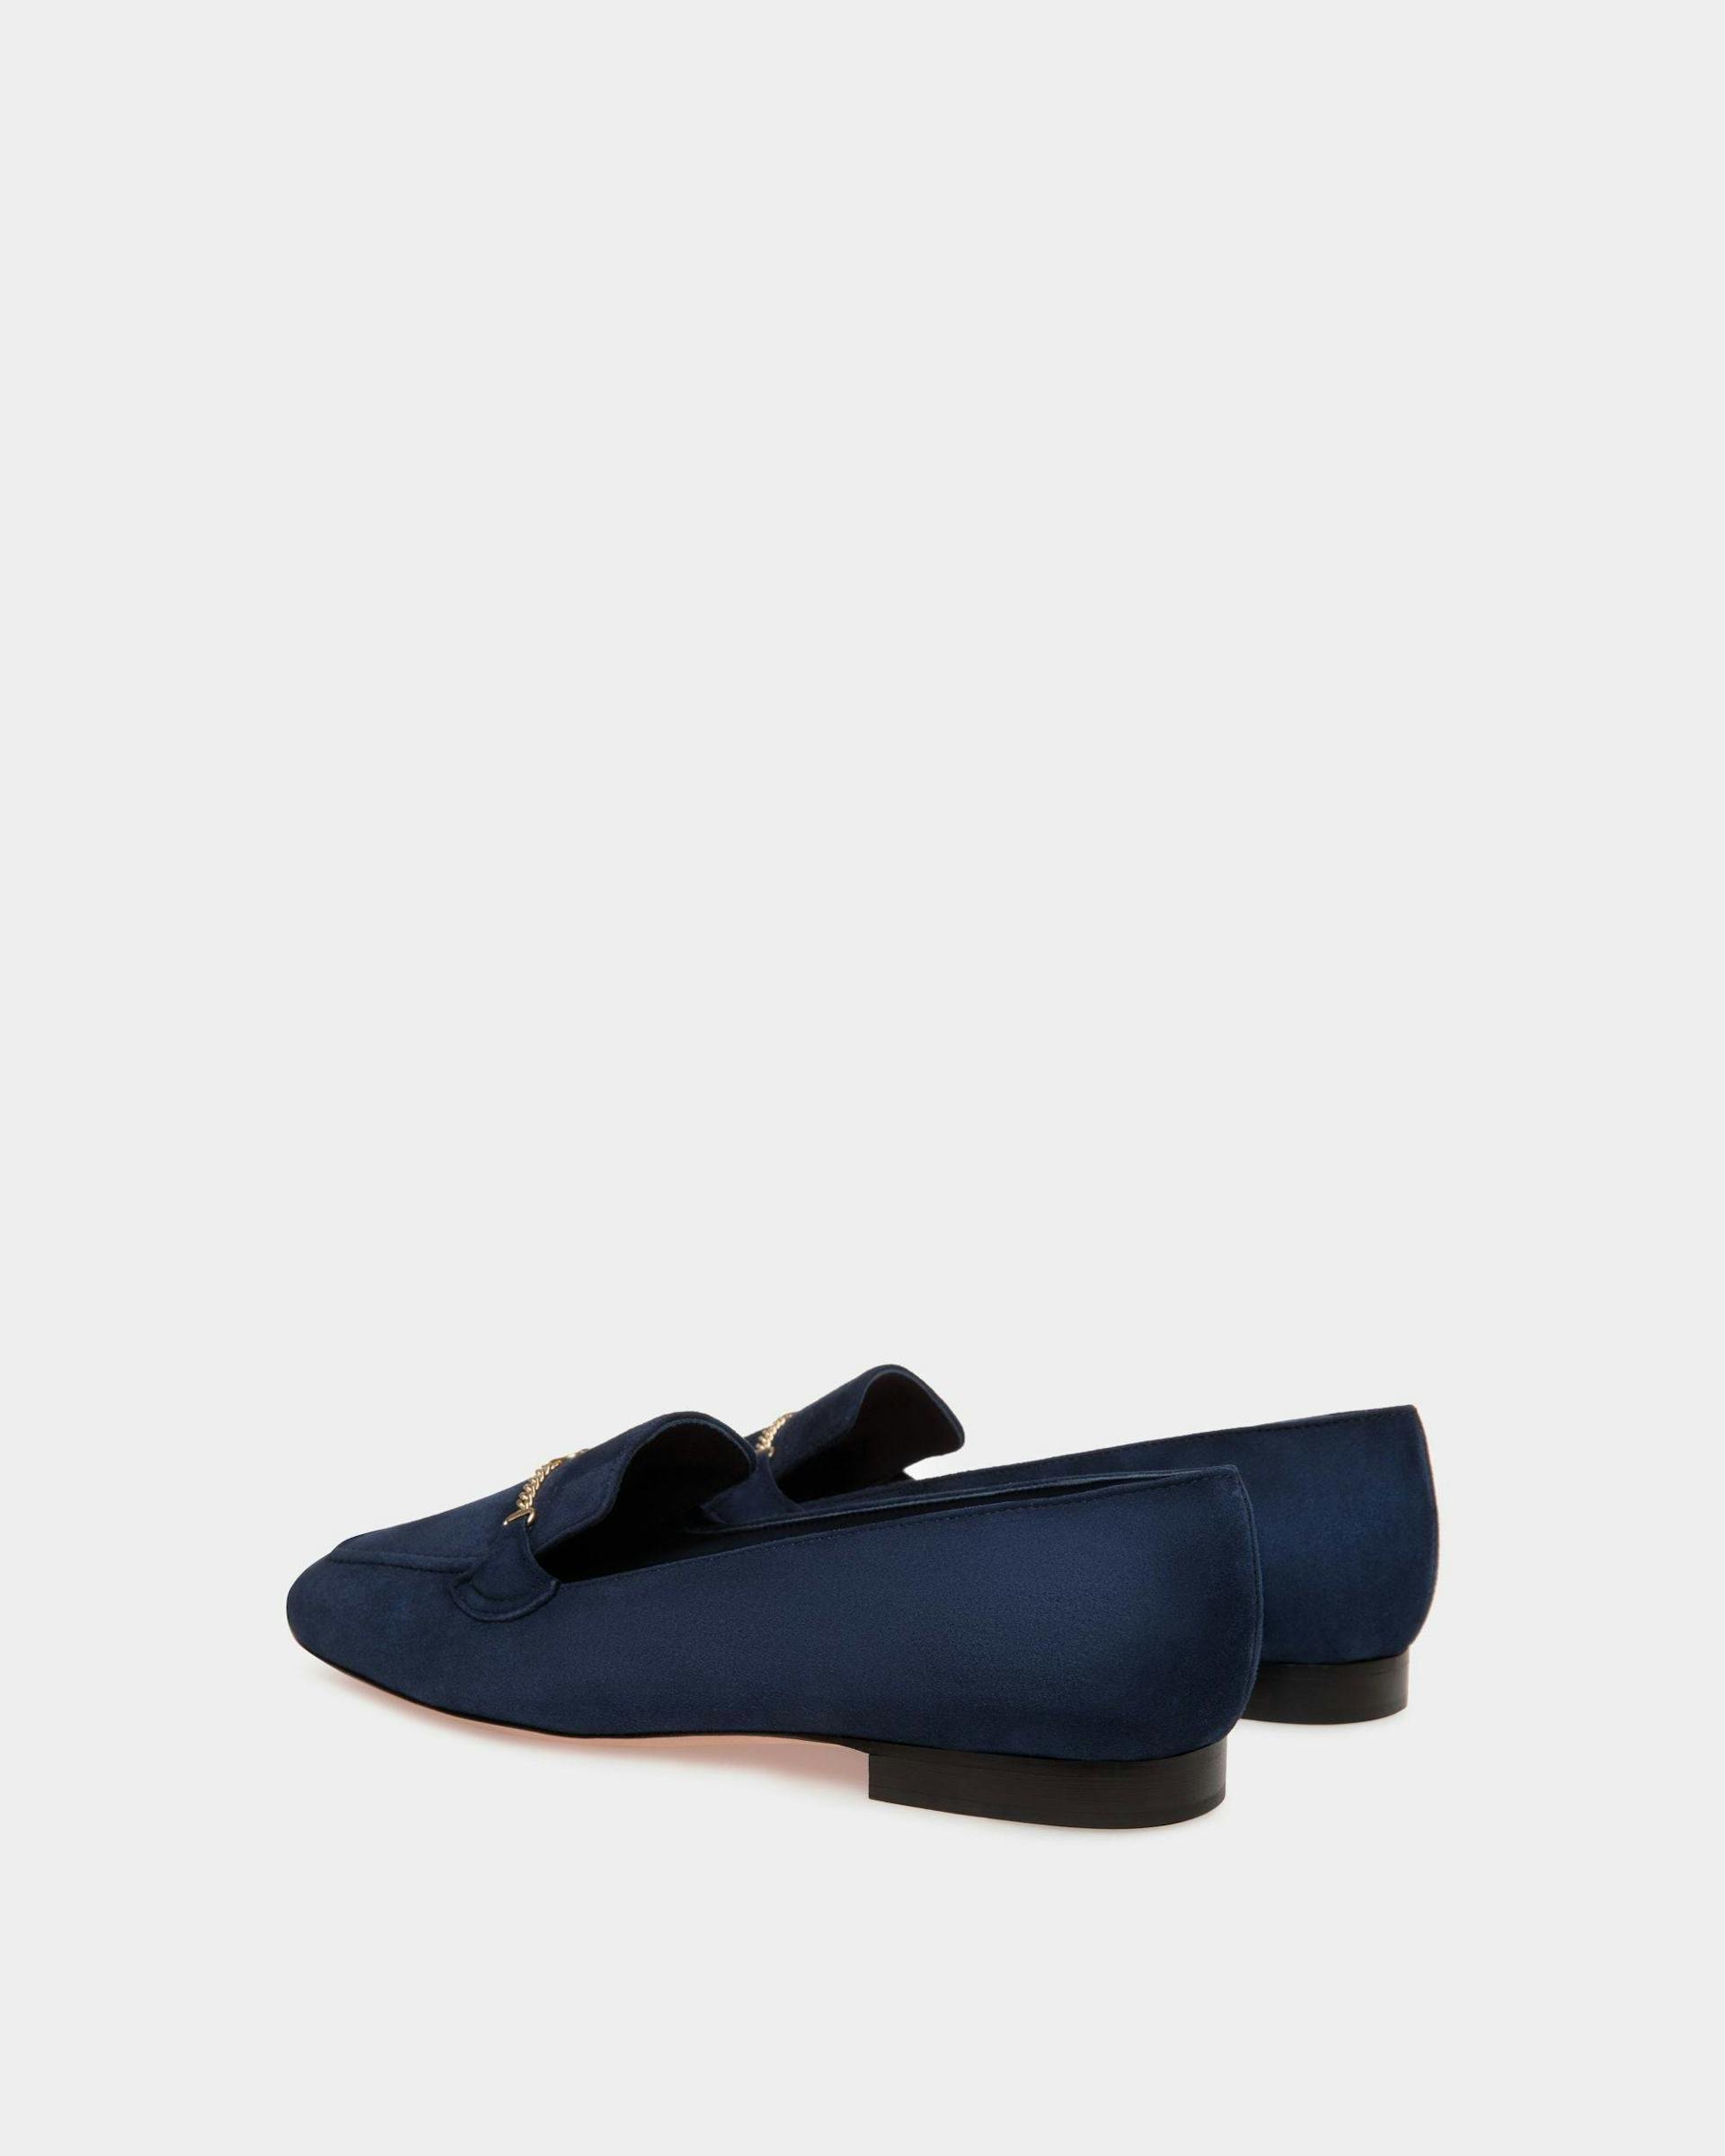 Women's Daily Emblem Loafer in Blue Suede | Bally | Still Life 3/4 Back